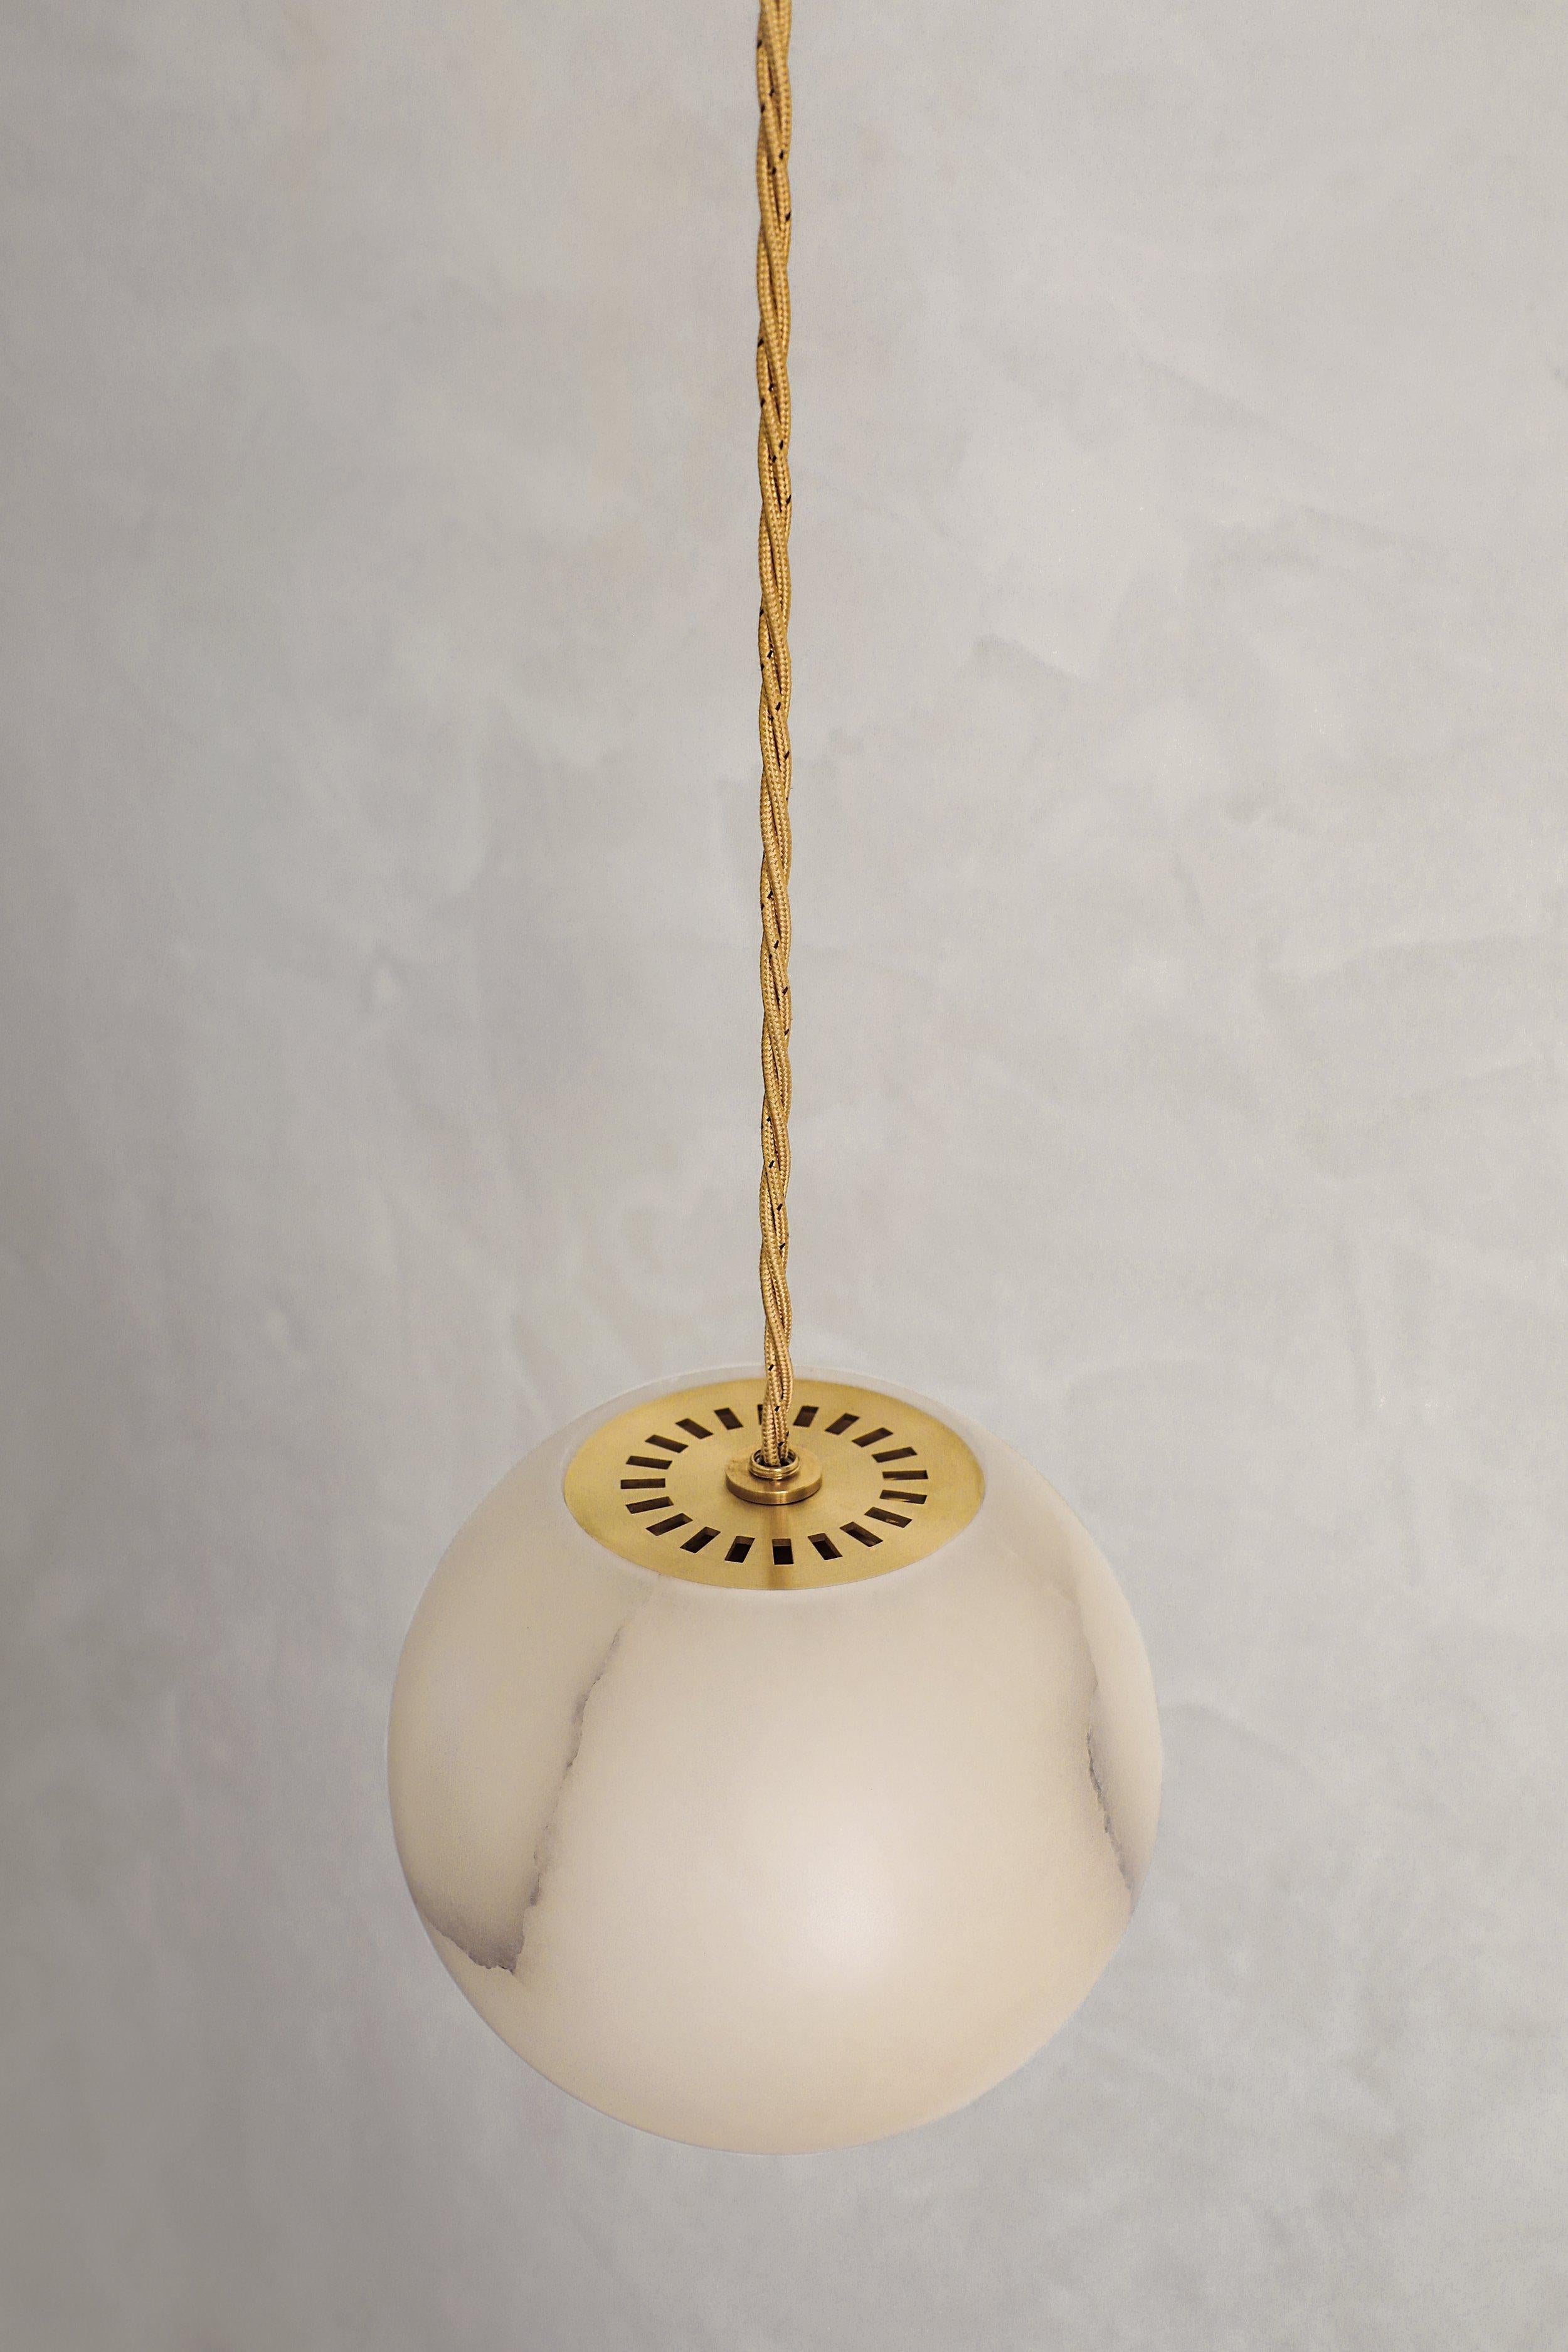 Planette Cable 12 Pendant by Contain
Dimensions: Ø 12 x H 100 cm (custom lenght).
Materials: Alabaster, brass, optical lens.

Also available in different finishes and dimensions (Ø12 cm / Ø16,5 cm / Ø18 cm x custom length). Please contact